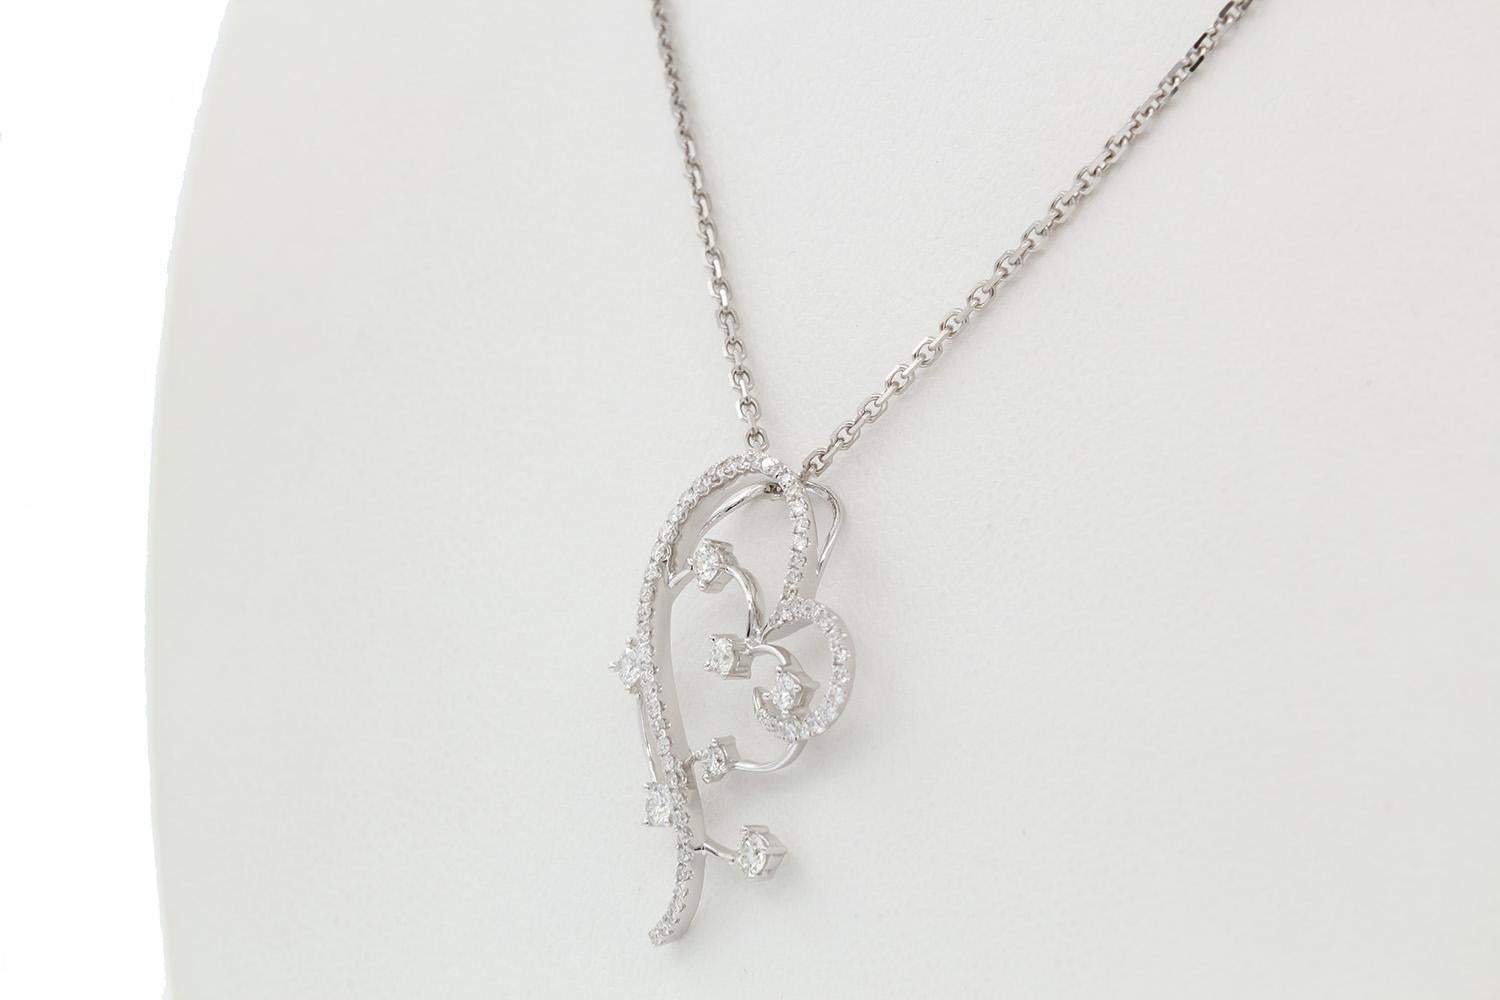 18k White Gold & Diamond Sweeping Heart Silhouette Pendant Necklace In Excellent Condition For Sale In Tustin, CA